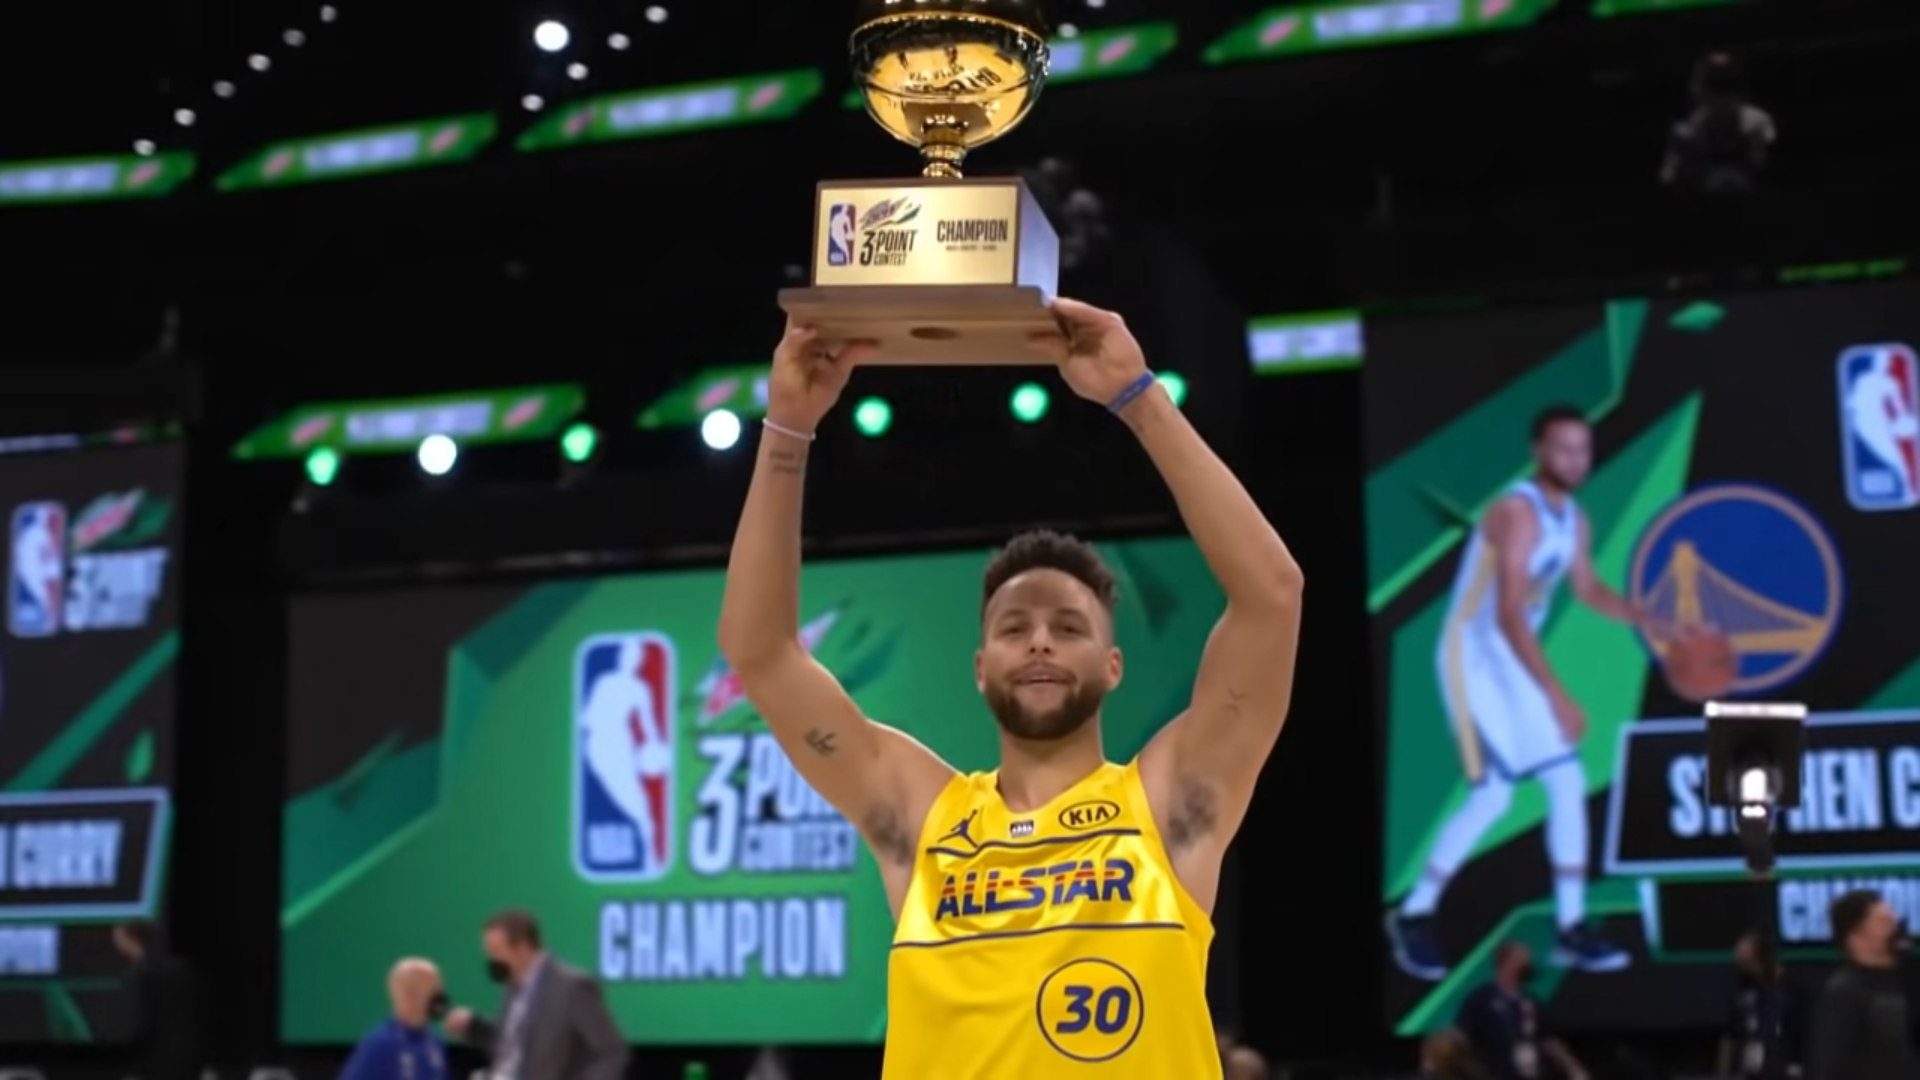 Stephen Curry wins 3 point shooting contest